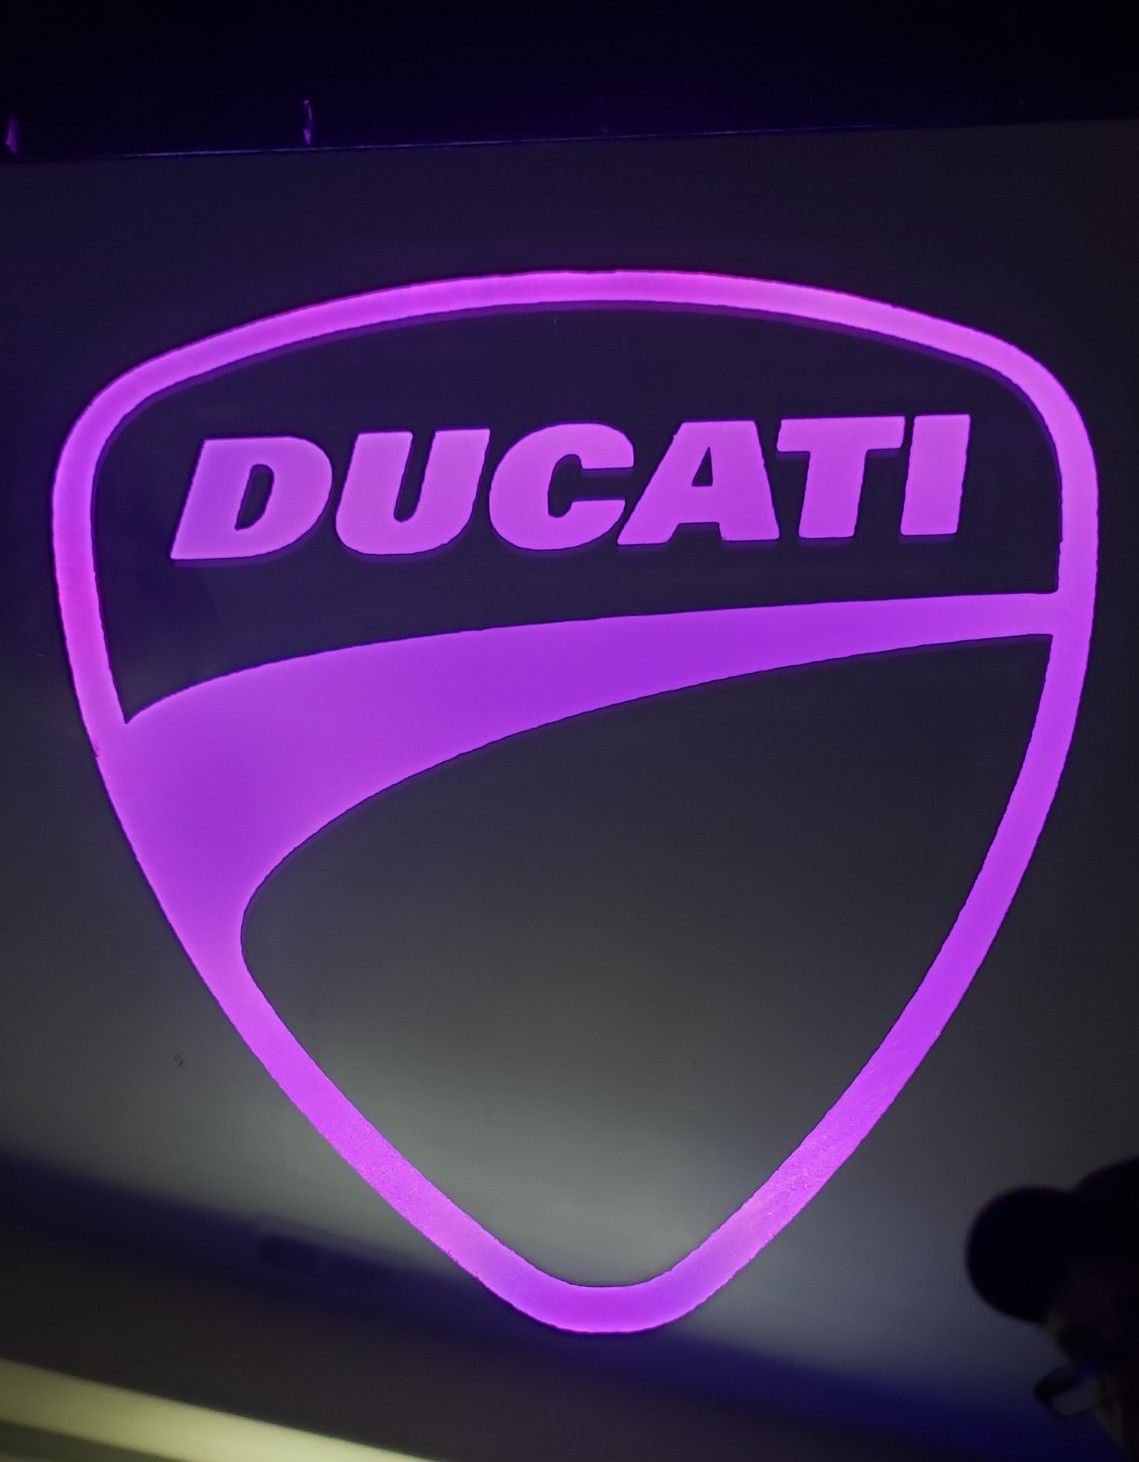 Ducati etched lighted mirror